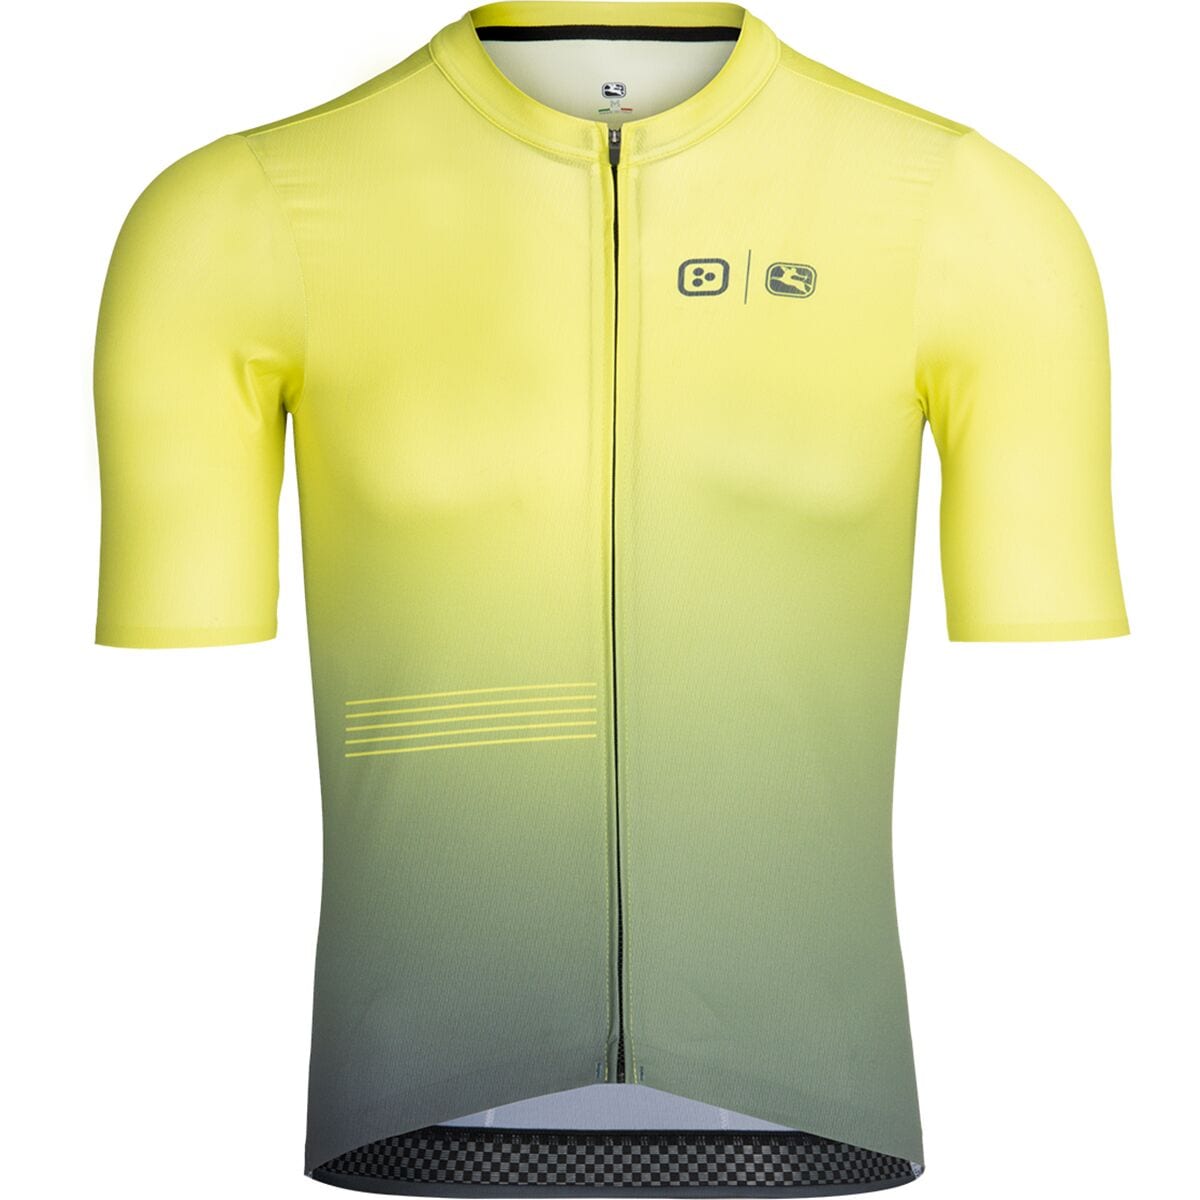 Competitive Cyclist Race Day Short-Sleeve Jersey - Men's Electric Lime, 3XL